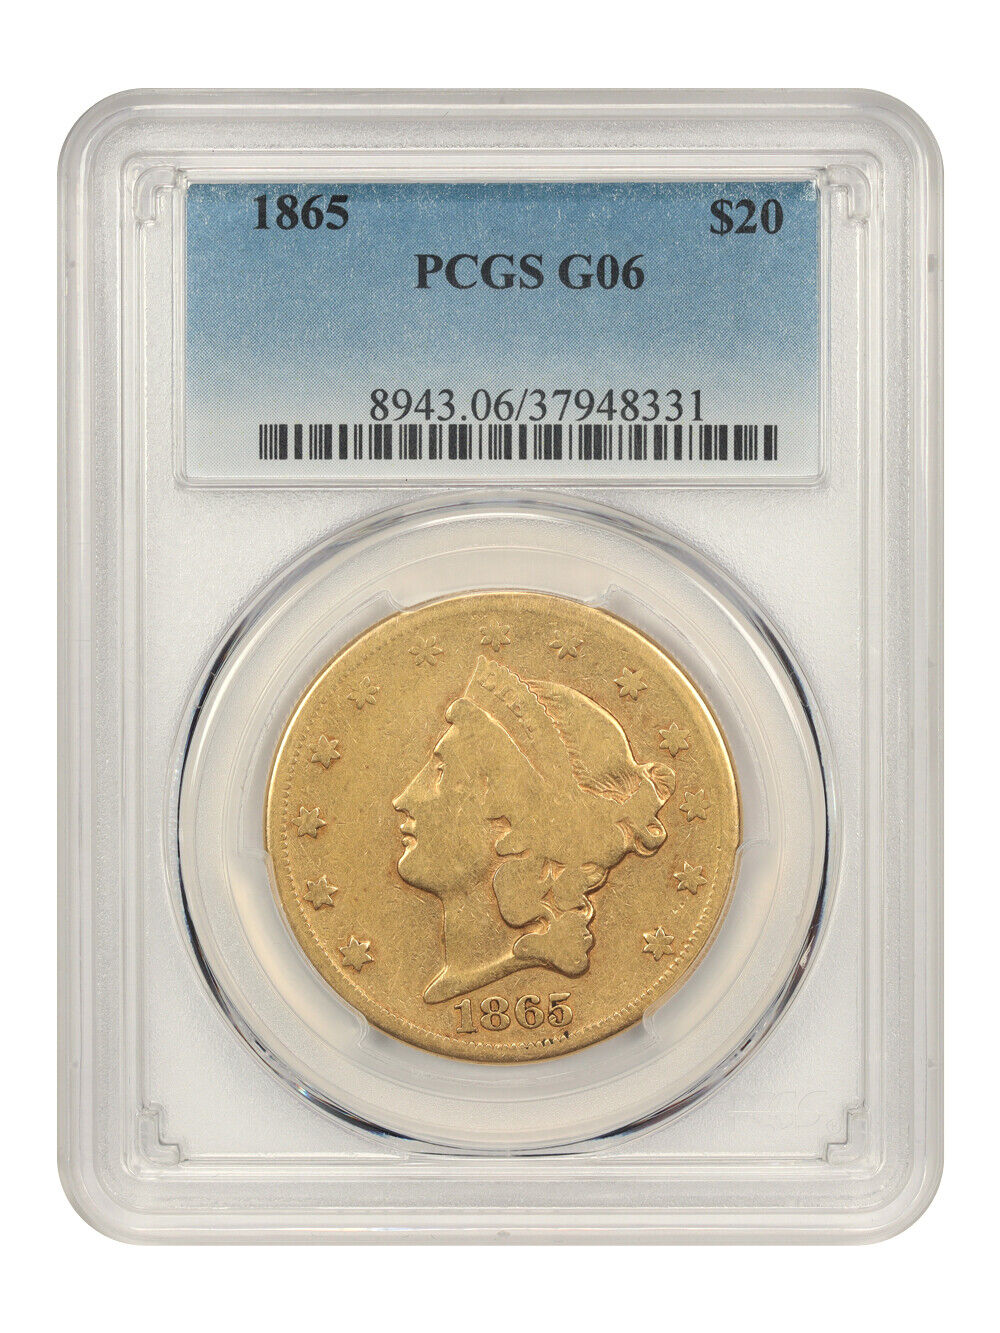 1865 $20 Pcgs Good-06 - Lowest Graded - Liberty Double Eagle - Gold Coin